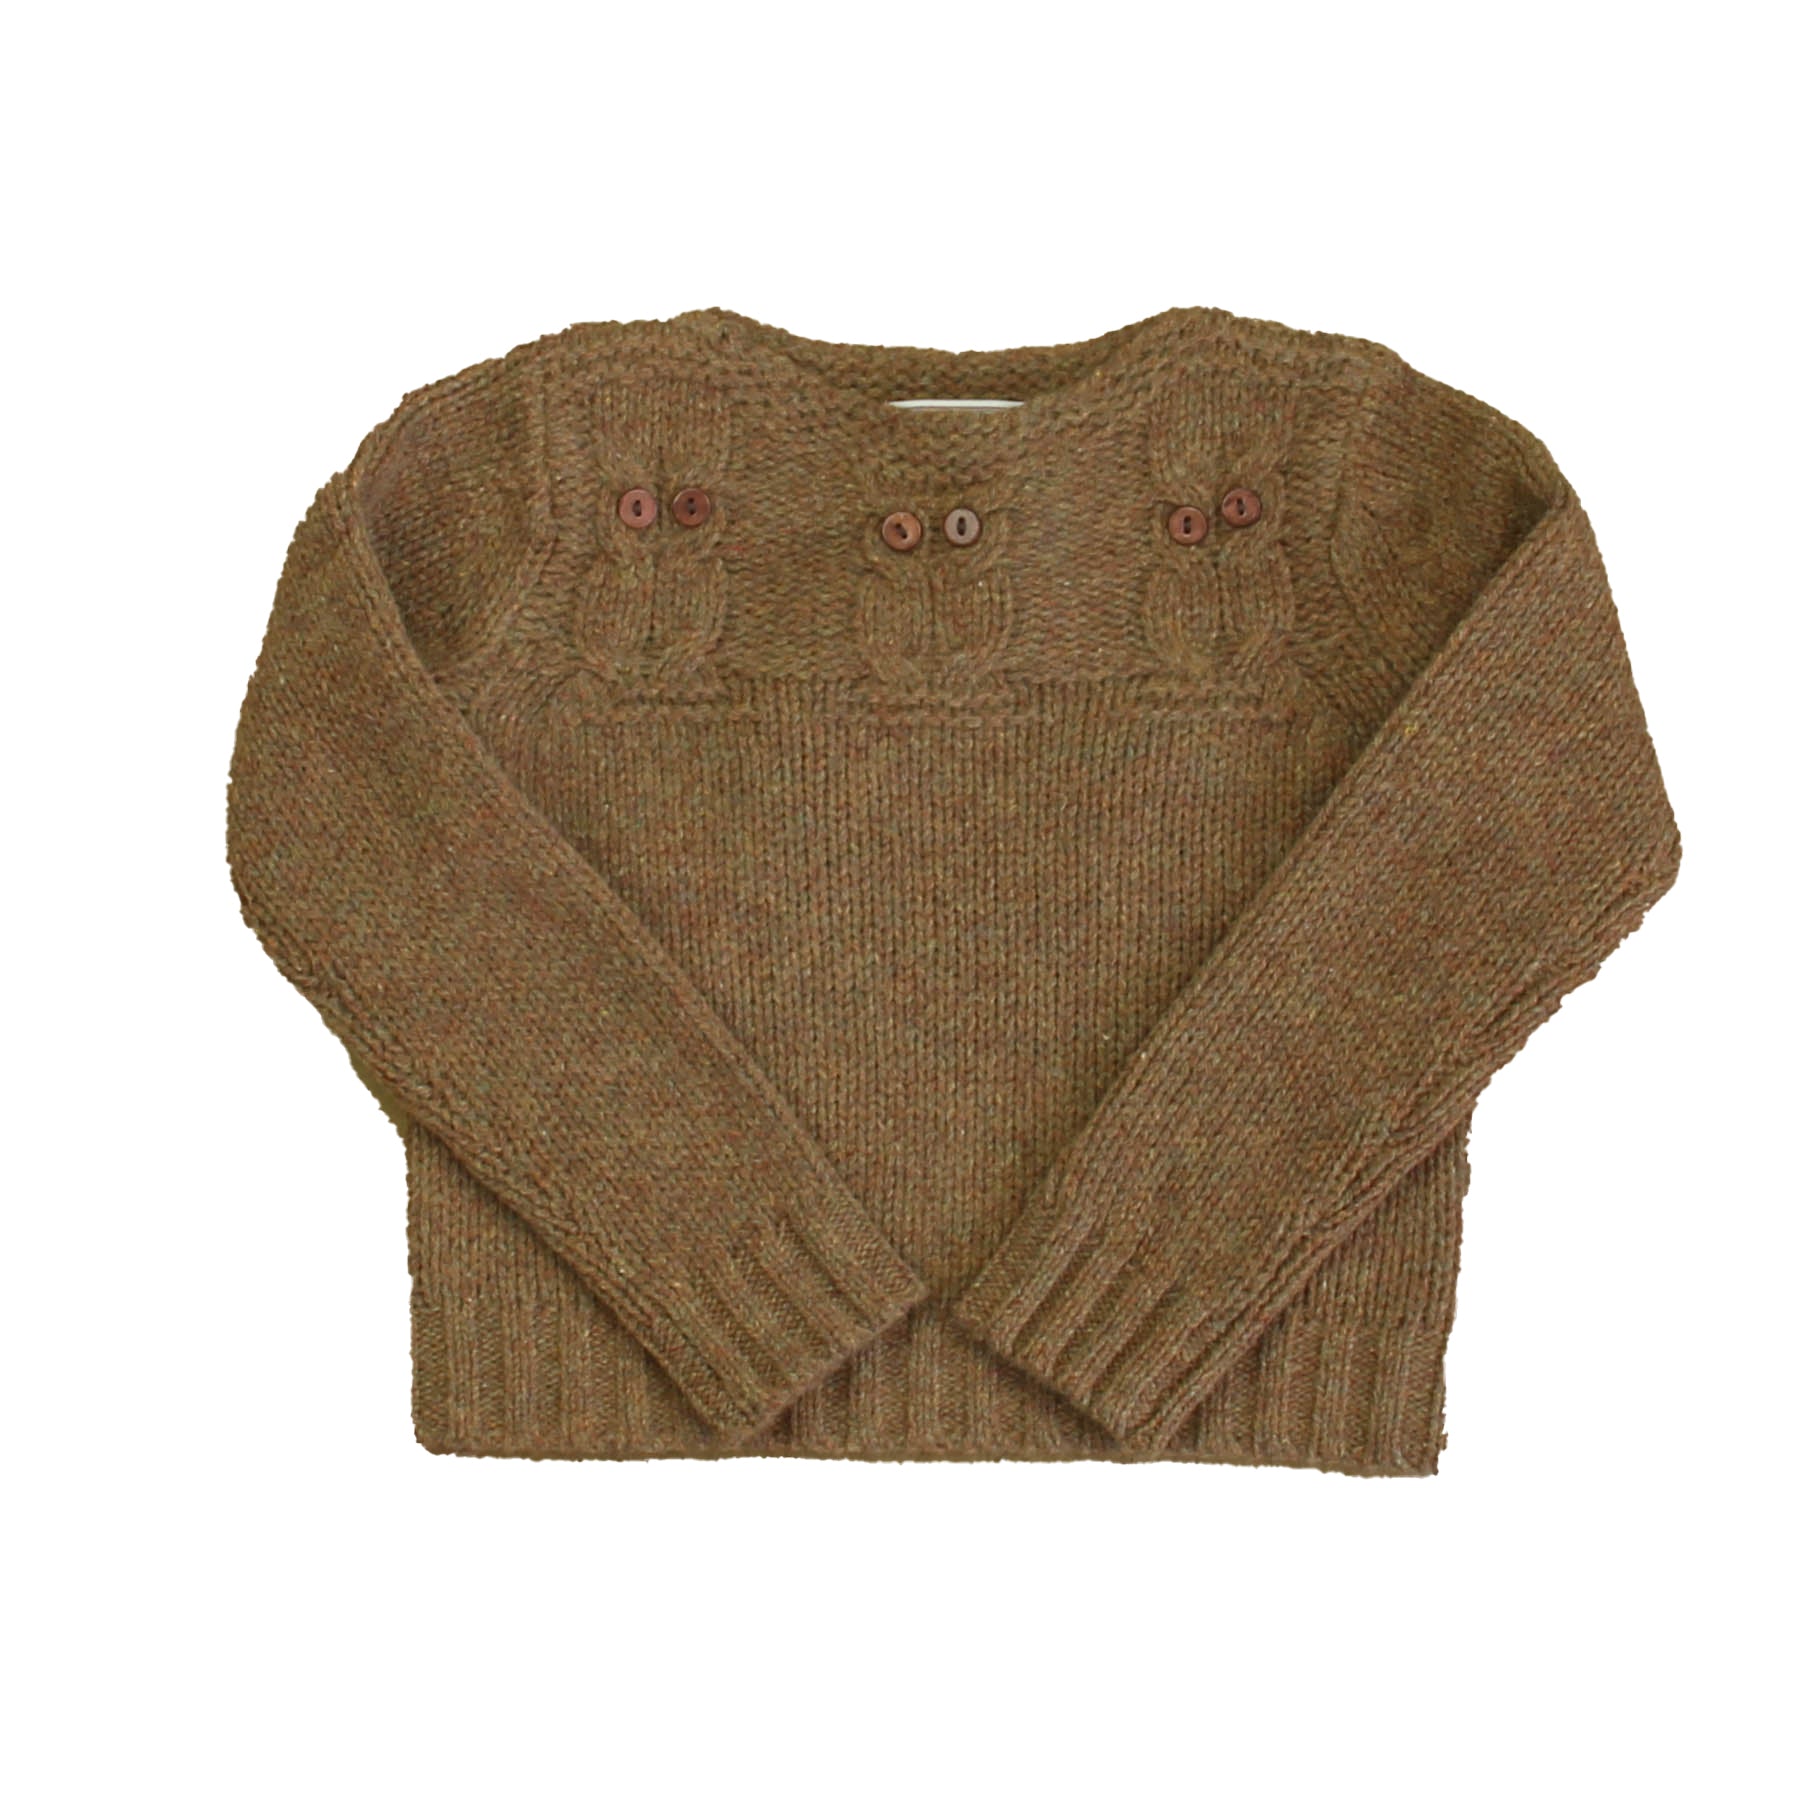 New with Tags: All Spice Sweater -- FINAL SALE